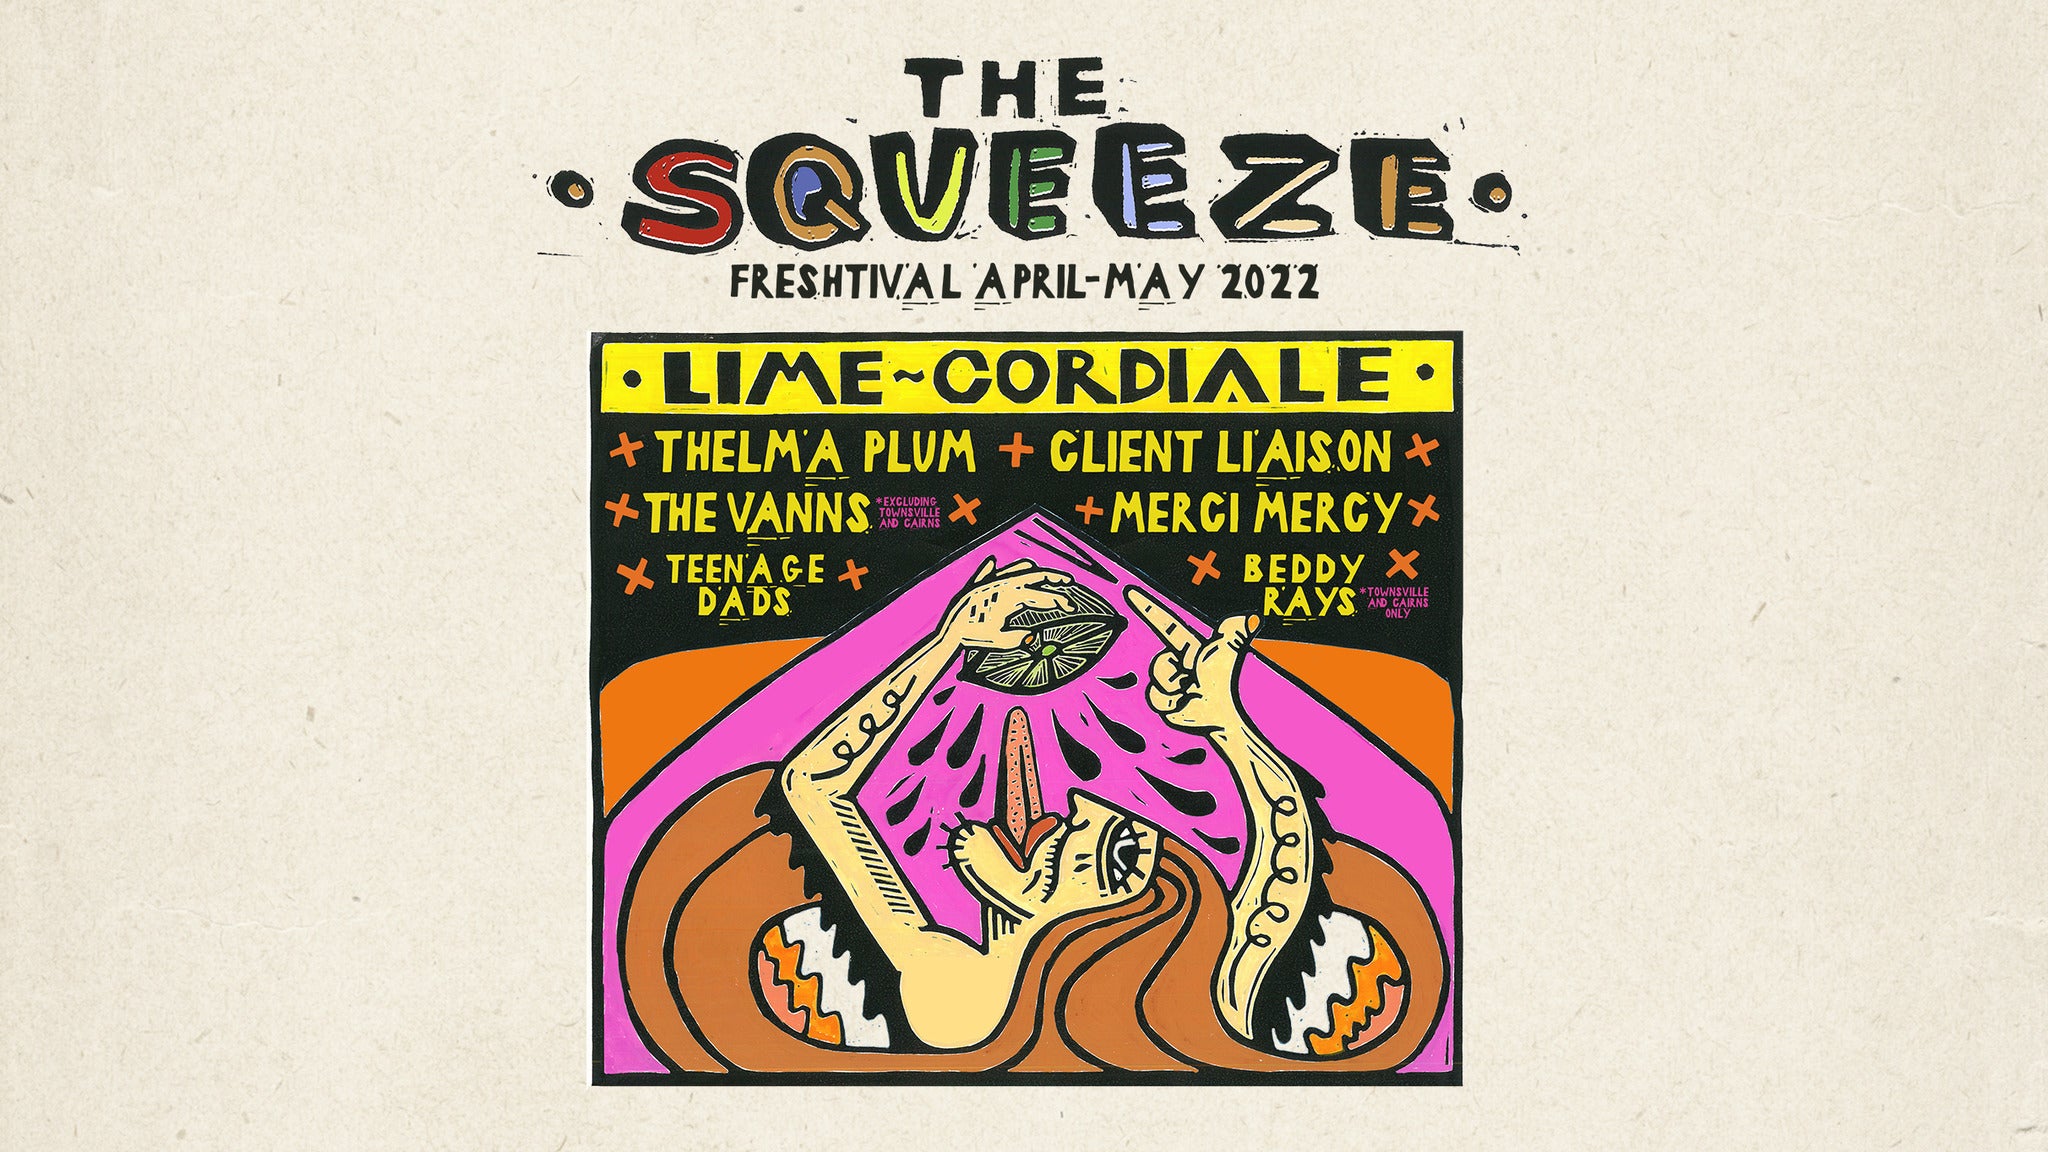 Image used with permission from Ticketmaster | a day on the green - The Squeeze Festival tickets